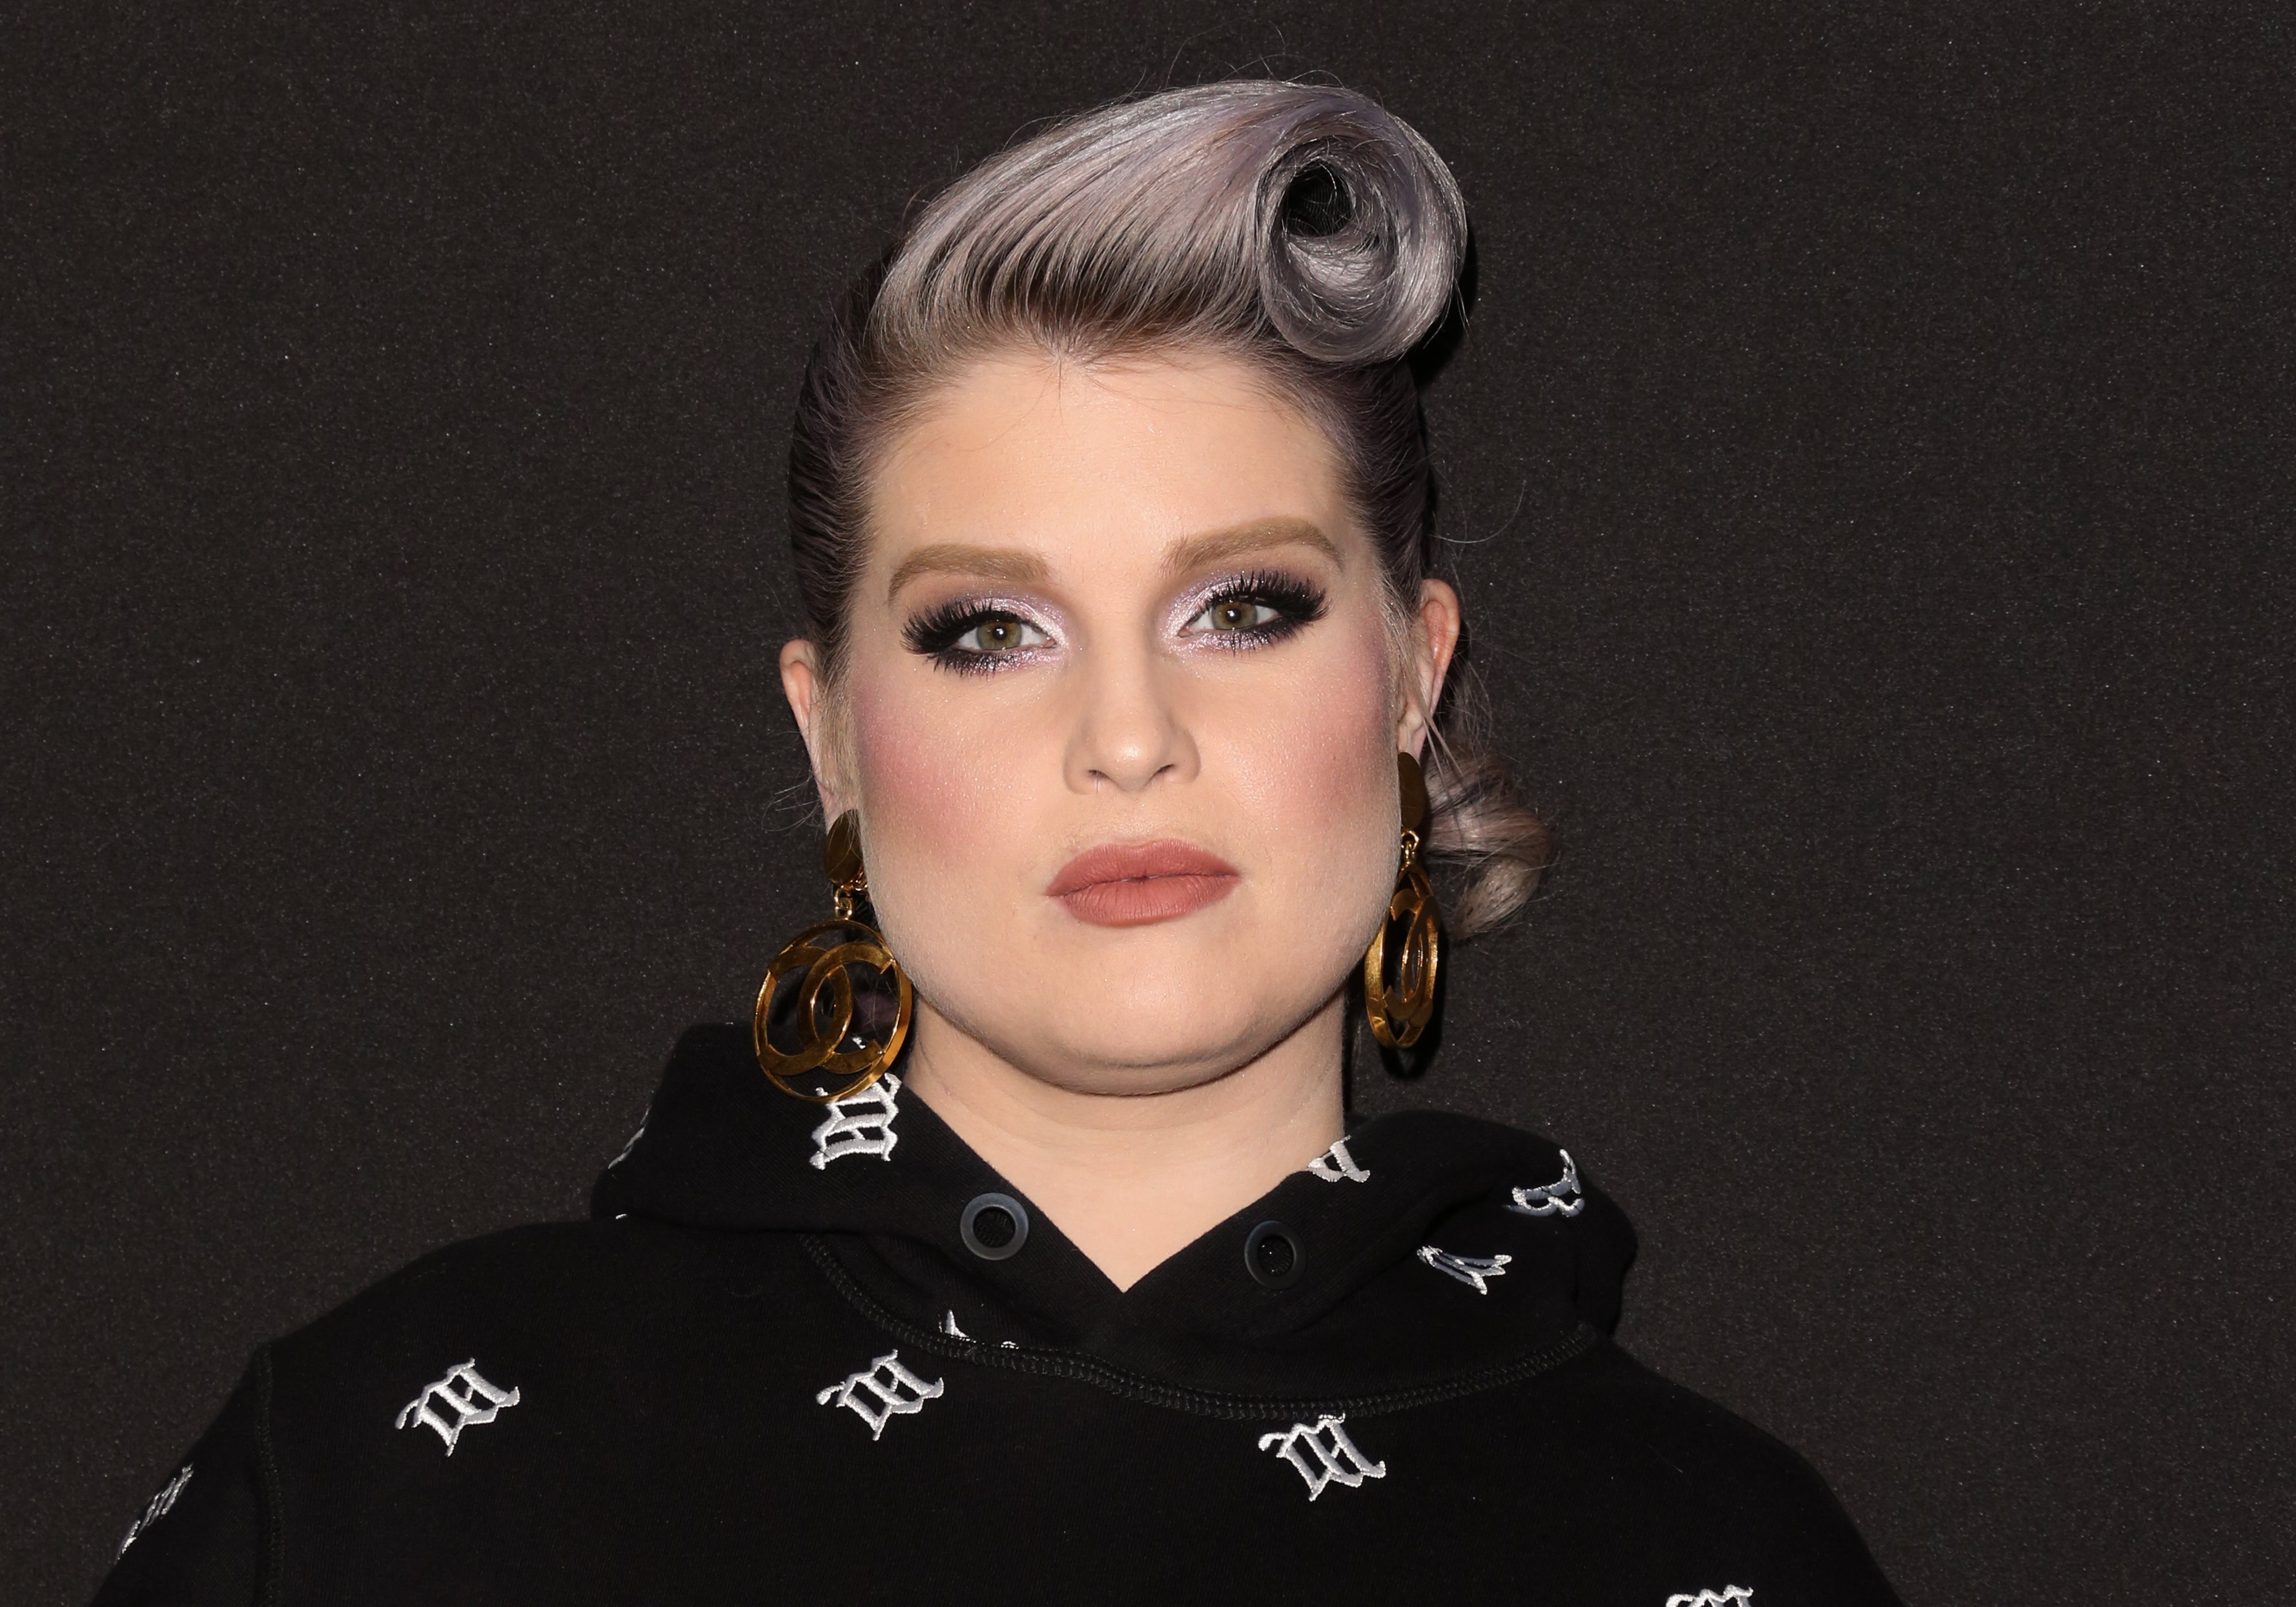 Kelly Osbourne at the launch of California's bike share app Wheels on March 14, 2019 | Source: Getty Images